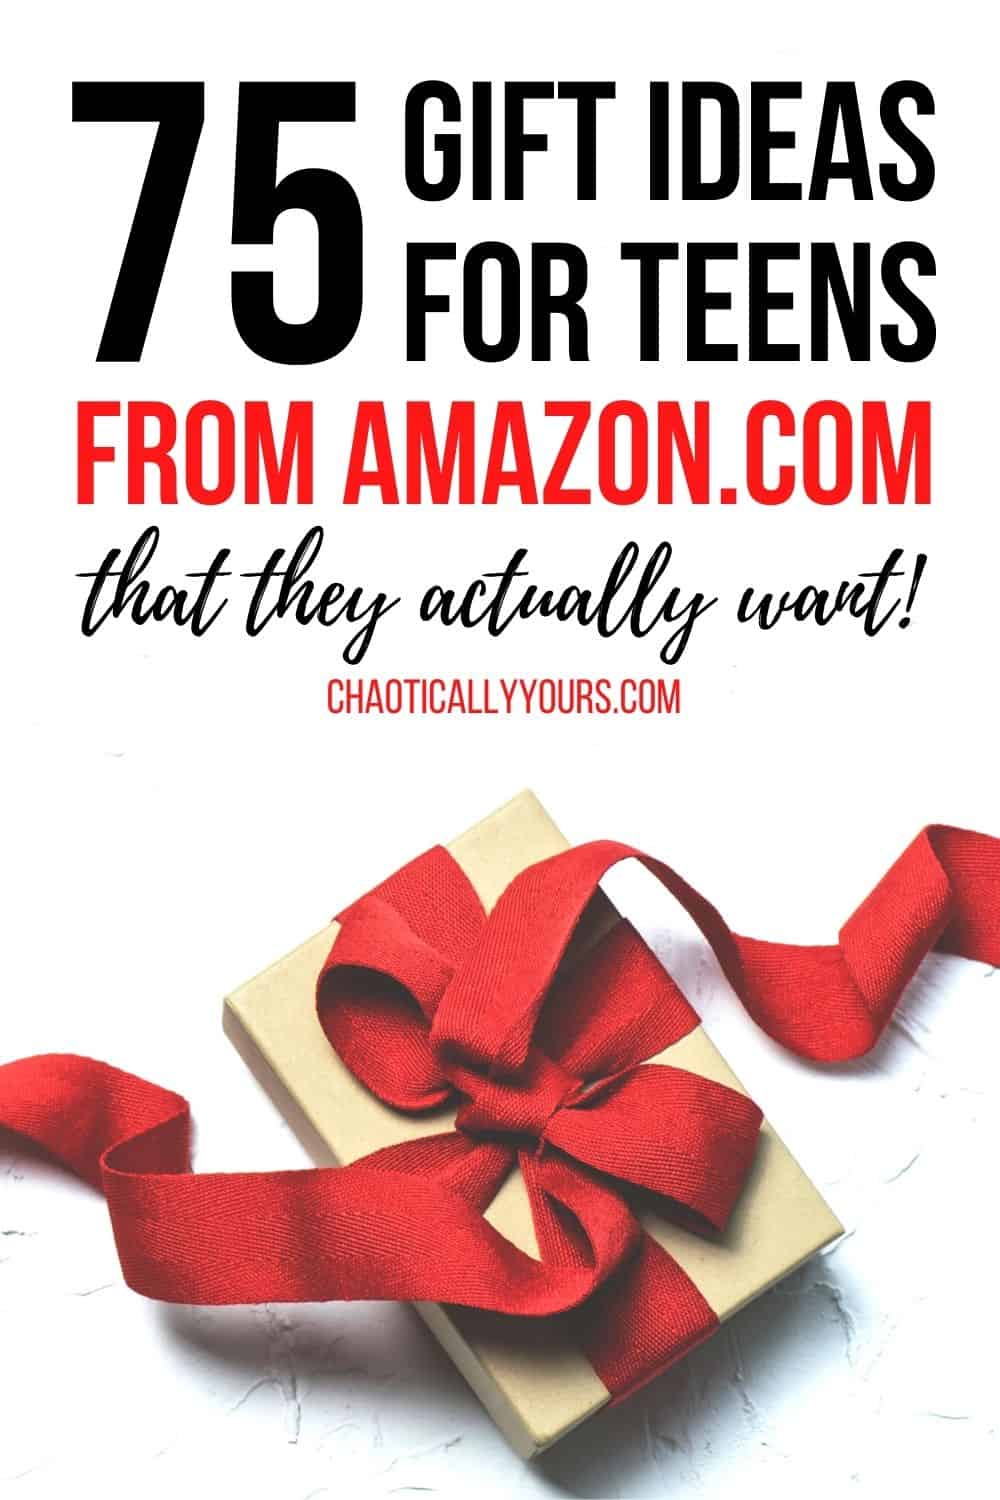 Gift Ideas for teens pin image